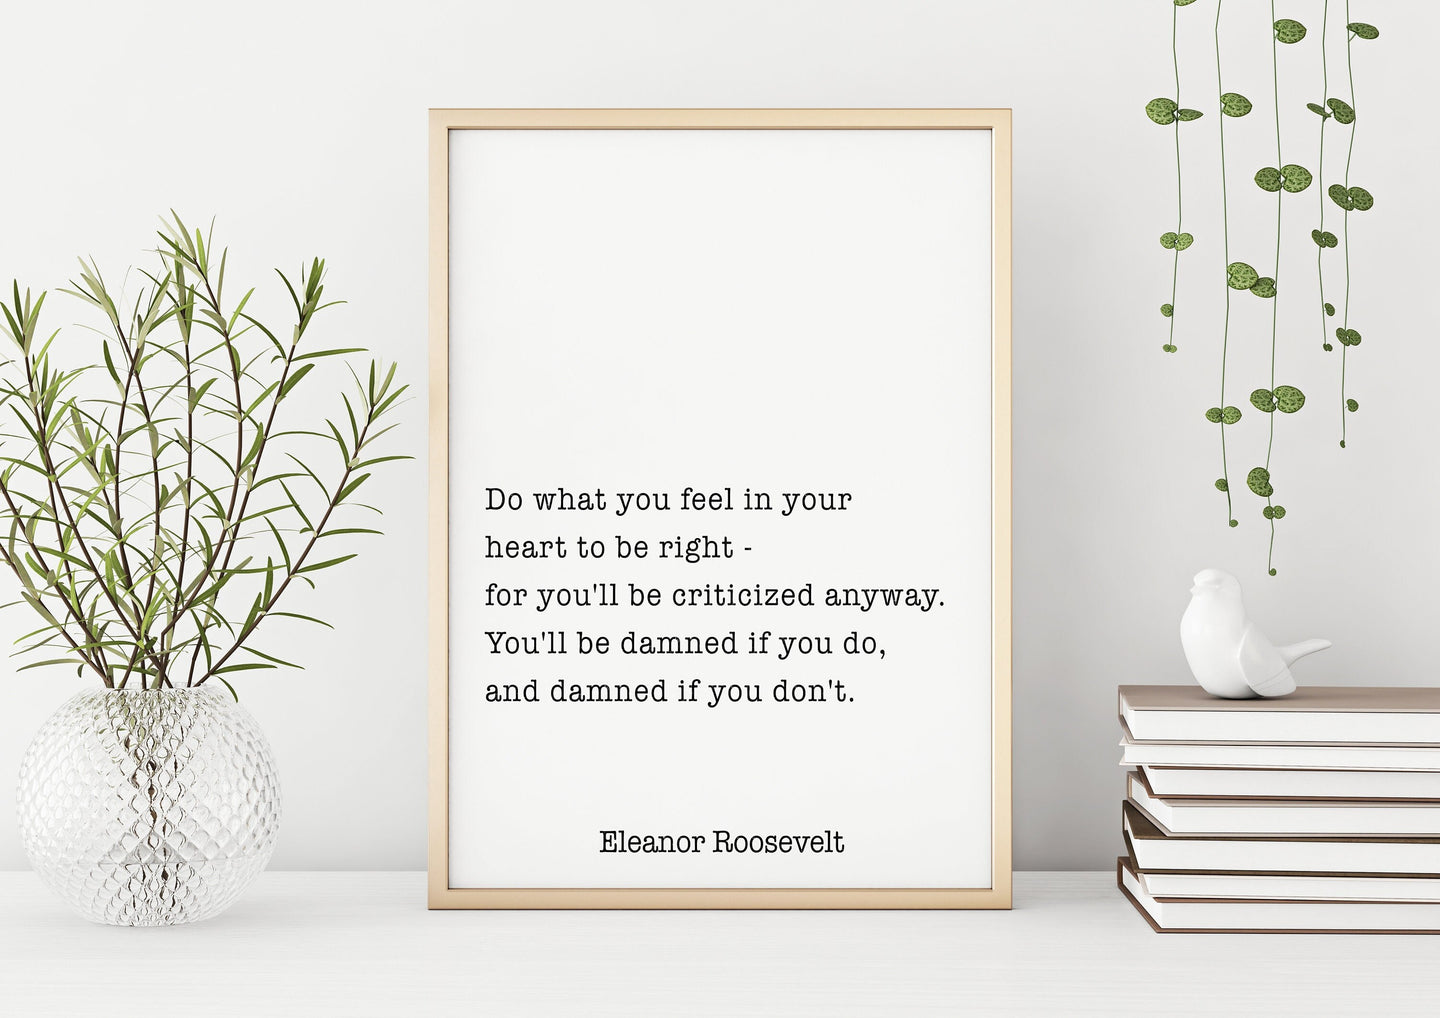 Eleanor Roosevelt Print - Do what you feel in your heart, damned if you do, damned if you don't - Inspirational feminist art Unframed print